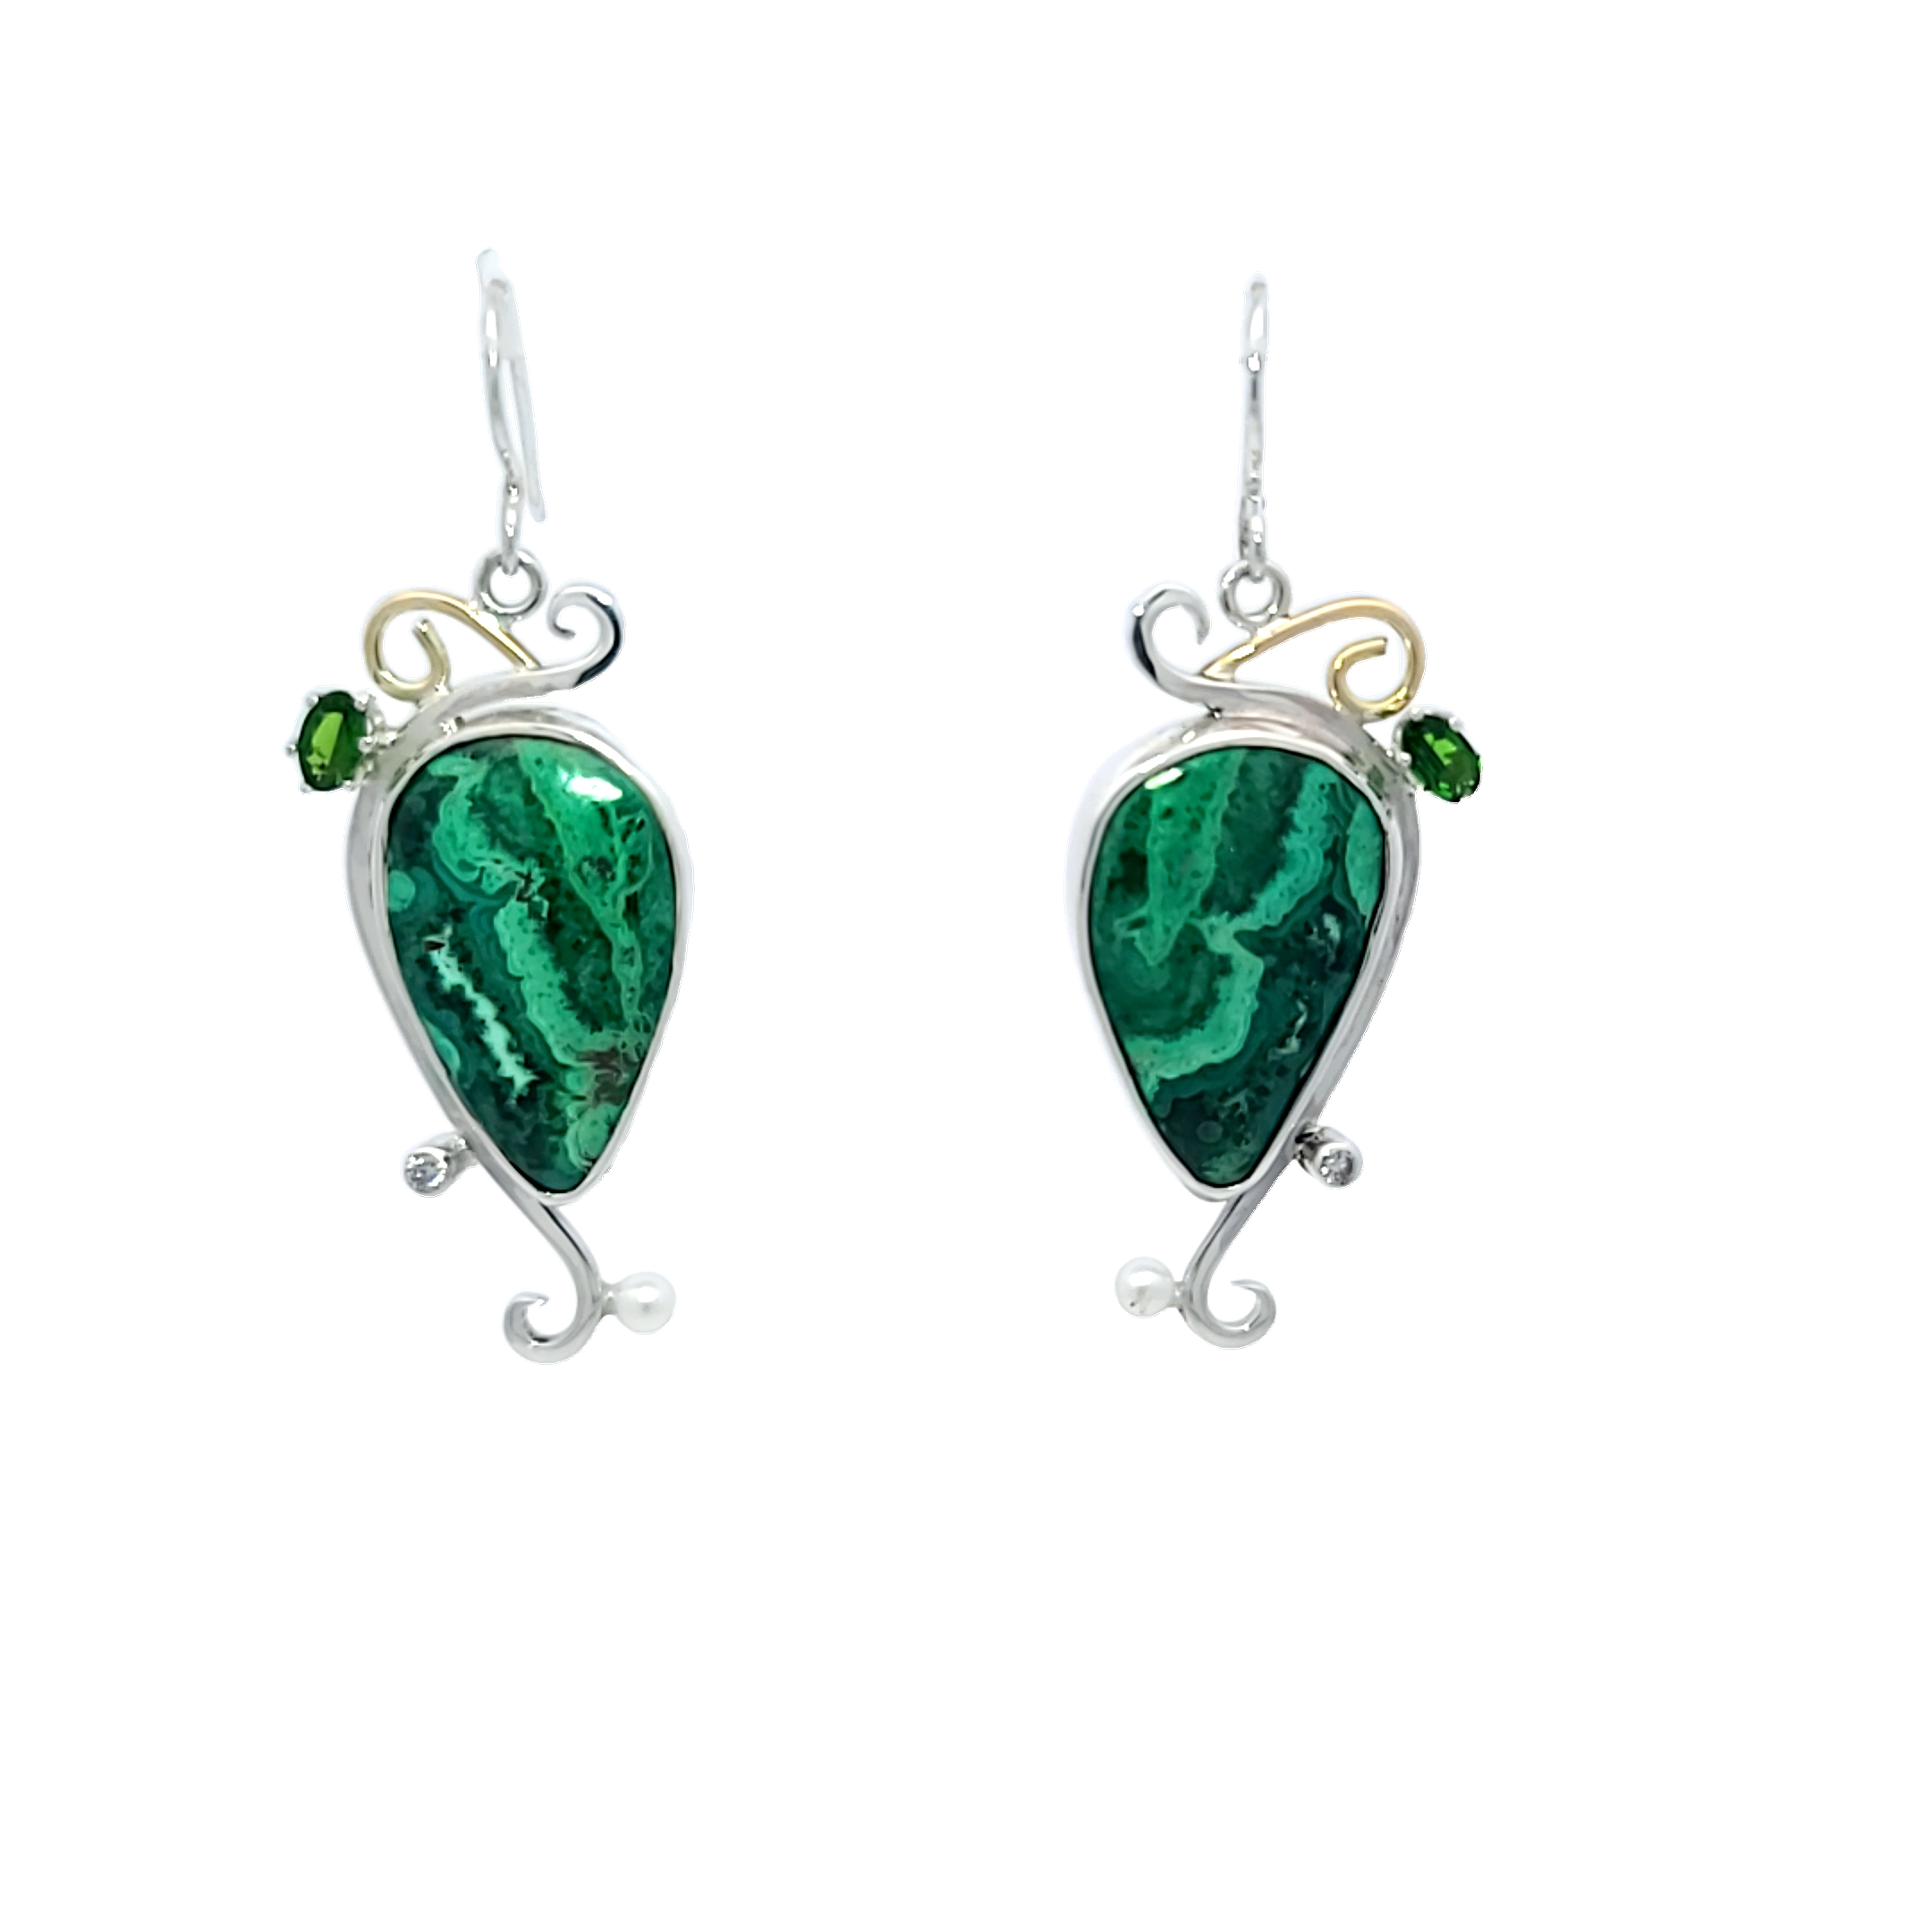 Flowering Malachite, Chrome Diopside, Cubic Zirconia with 22k Gold earrings